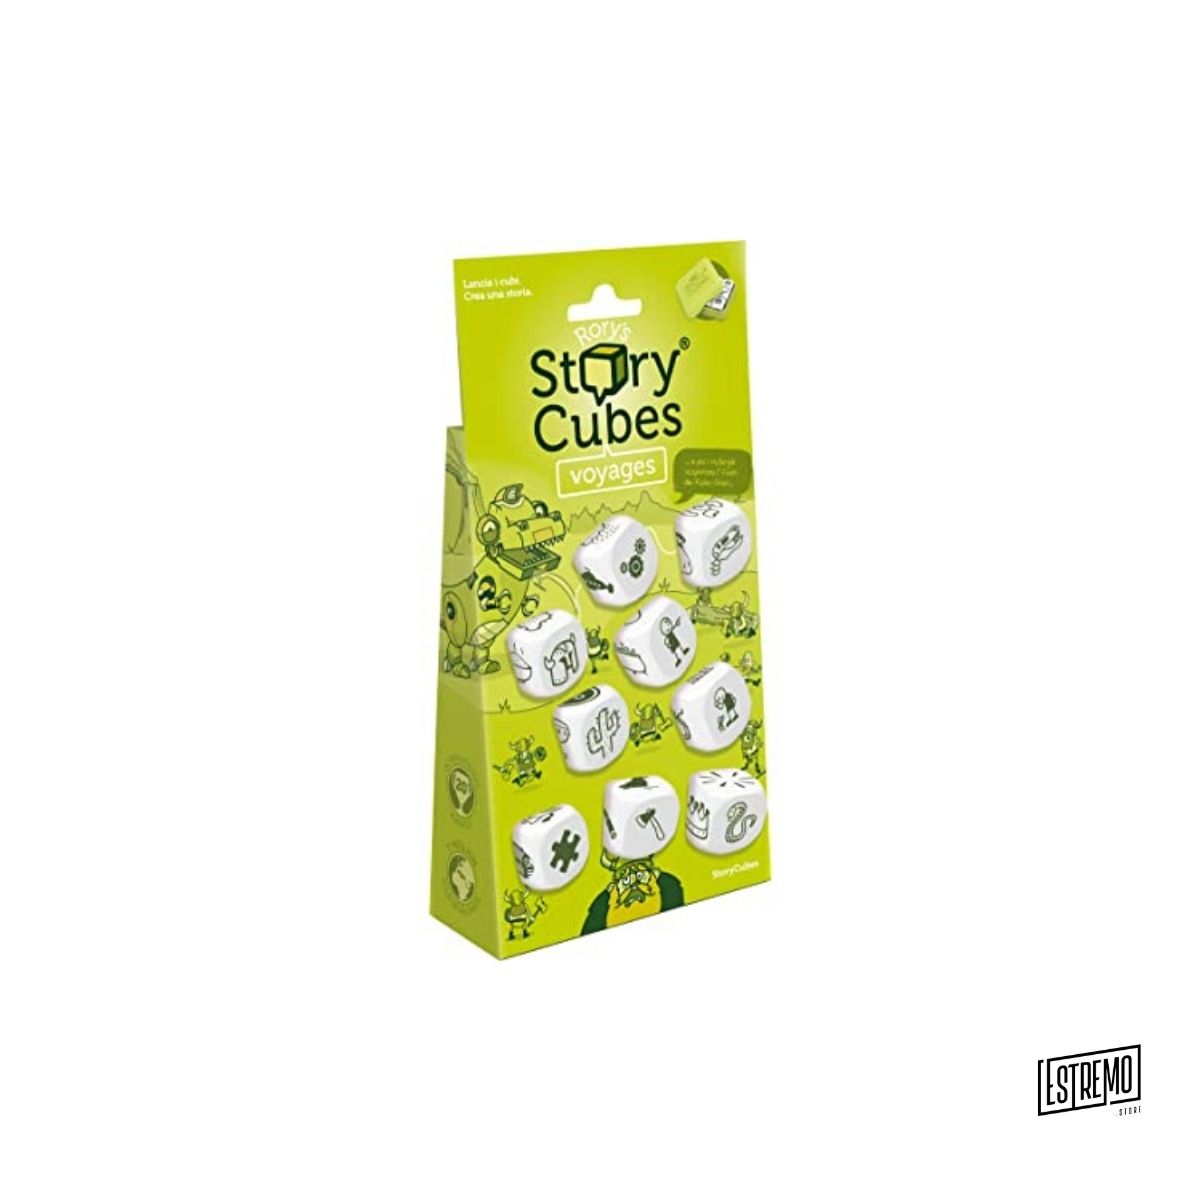 Rory'S Story Cubes Voyages Hangtab (Verde)